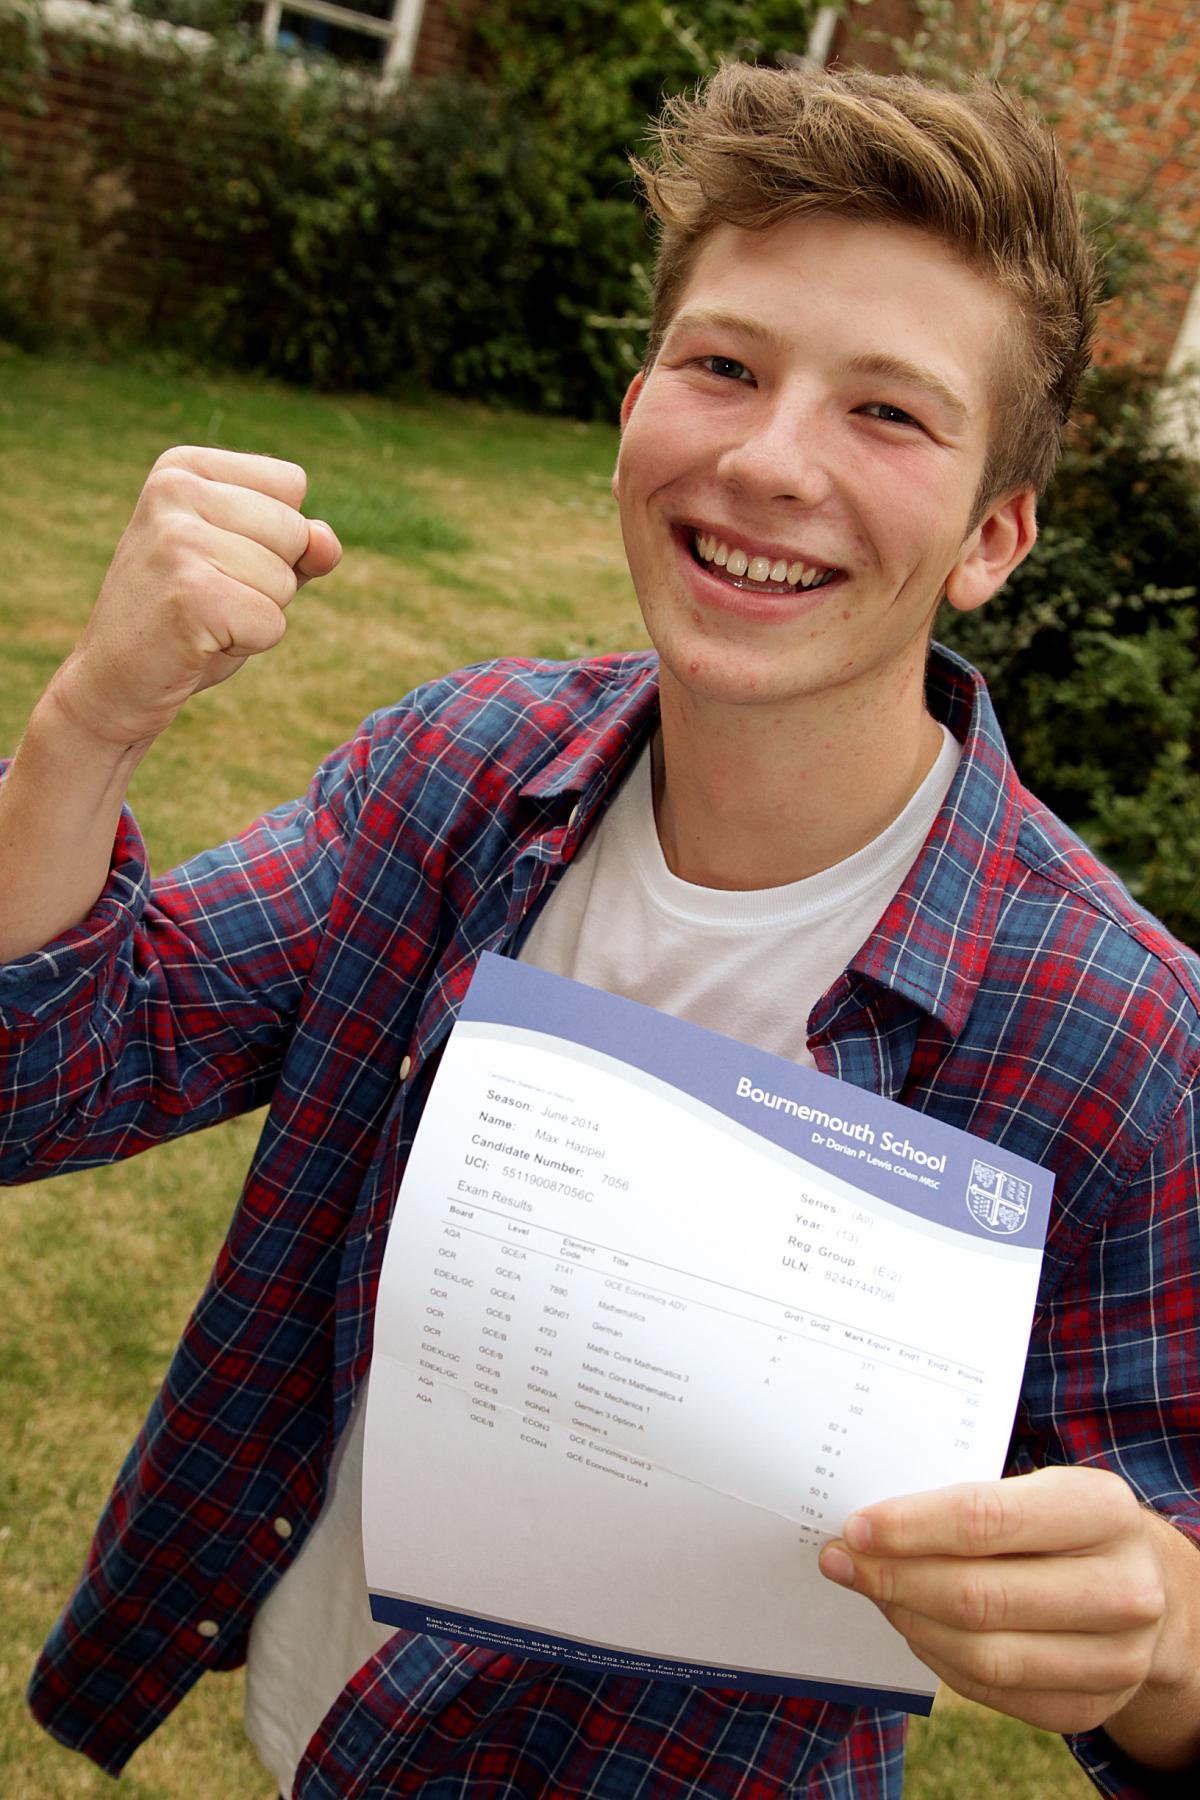 A Level Results Day at Bournemouth School 2014